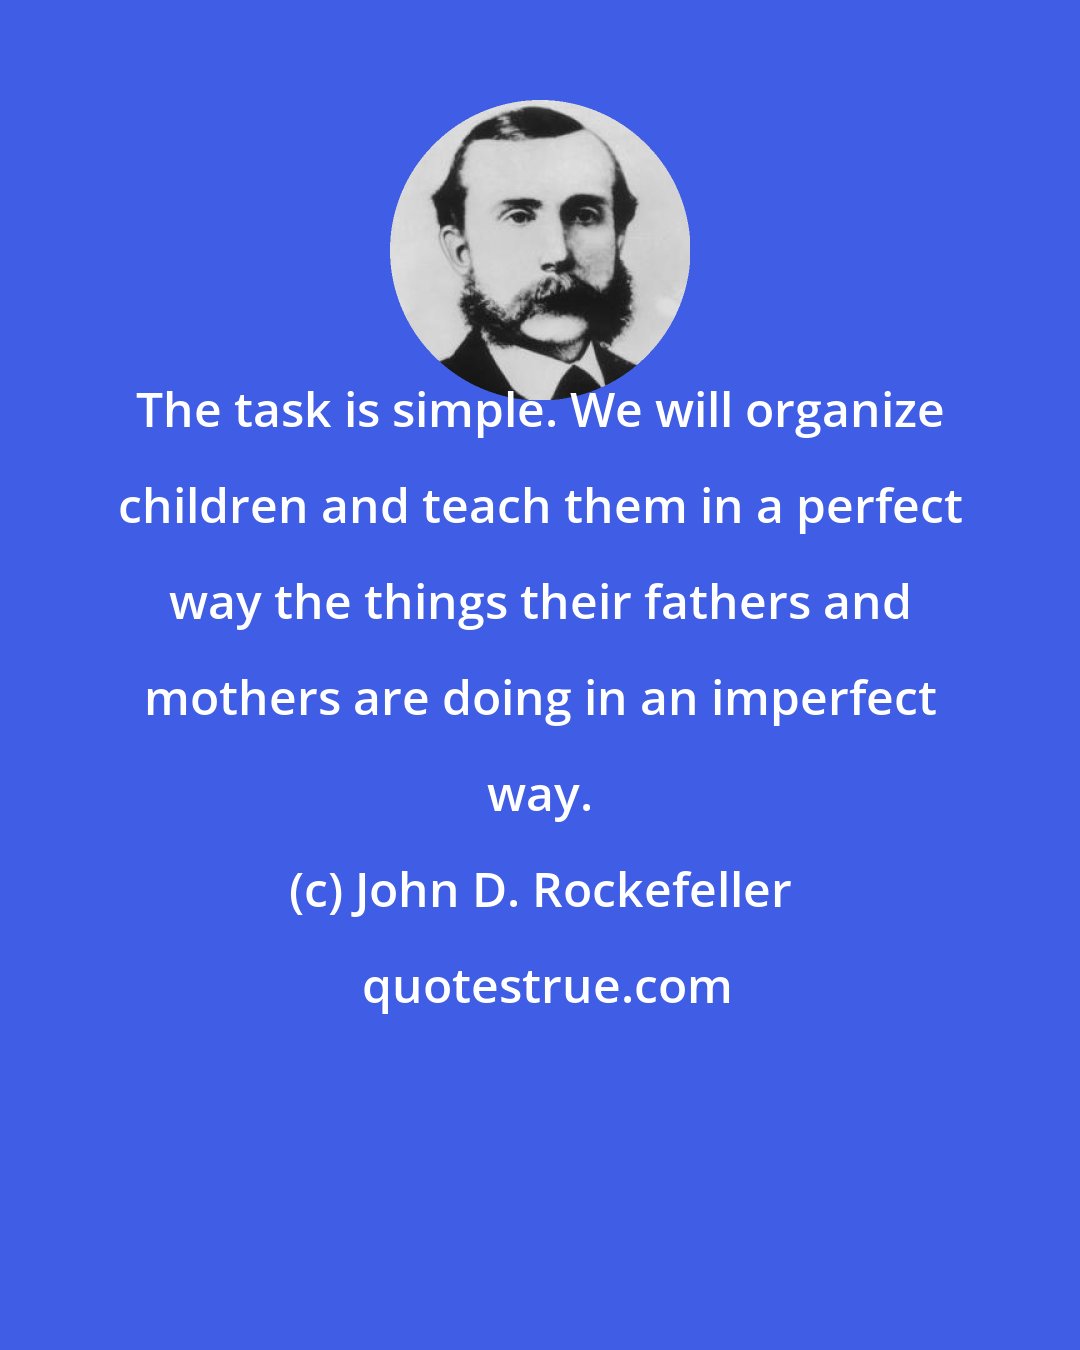 John D. Rockefeller: The task is simple. We will organize children and teach them in a perfect way the things their fathers and mothers are doing in an imperfect way.